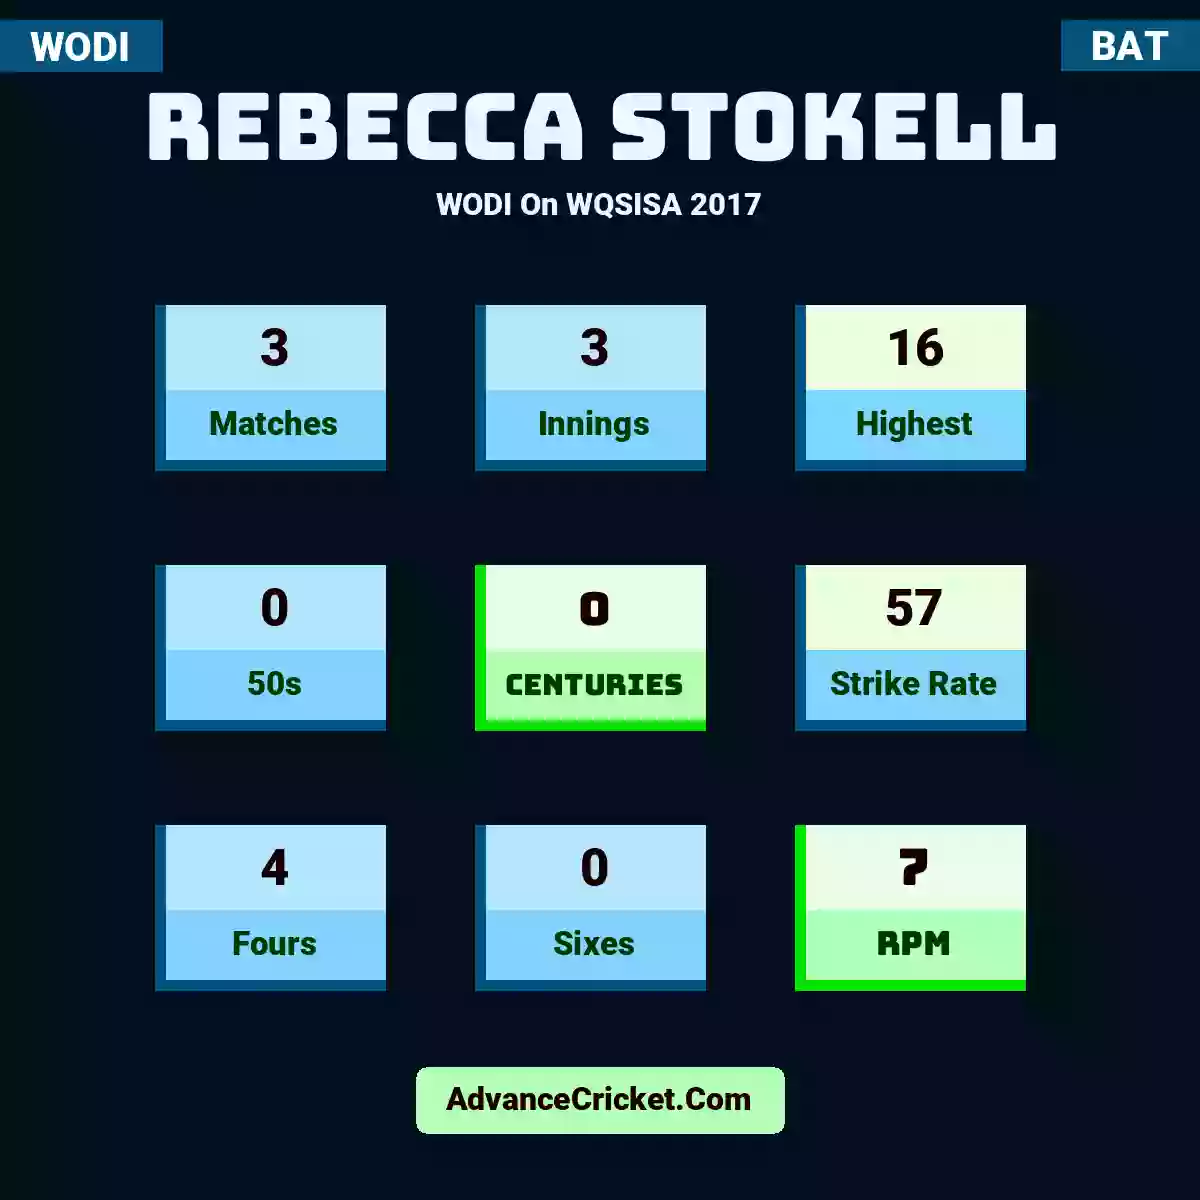 Rebecca Stokell WODI  On WQSISA 2017, Rebecca Stokell played 3 matches, scored 16 runs as highest, 0 half-centuries, and 0 centuries, with a strike rate of 57. R.Stokell hit 4 fours and 0 sixes, with an RPM of 7.